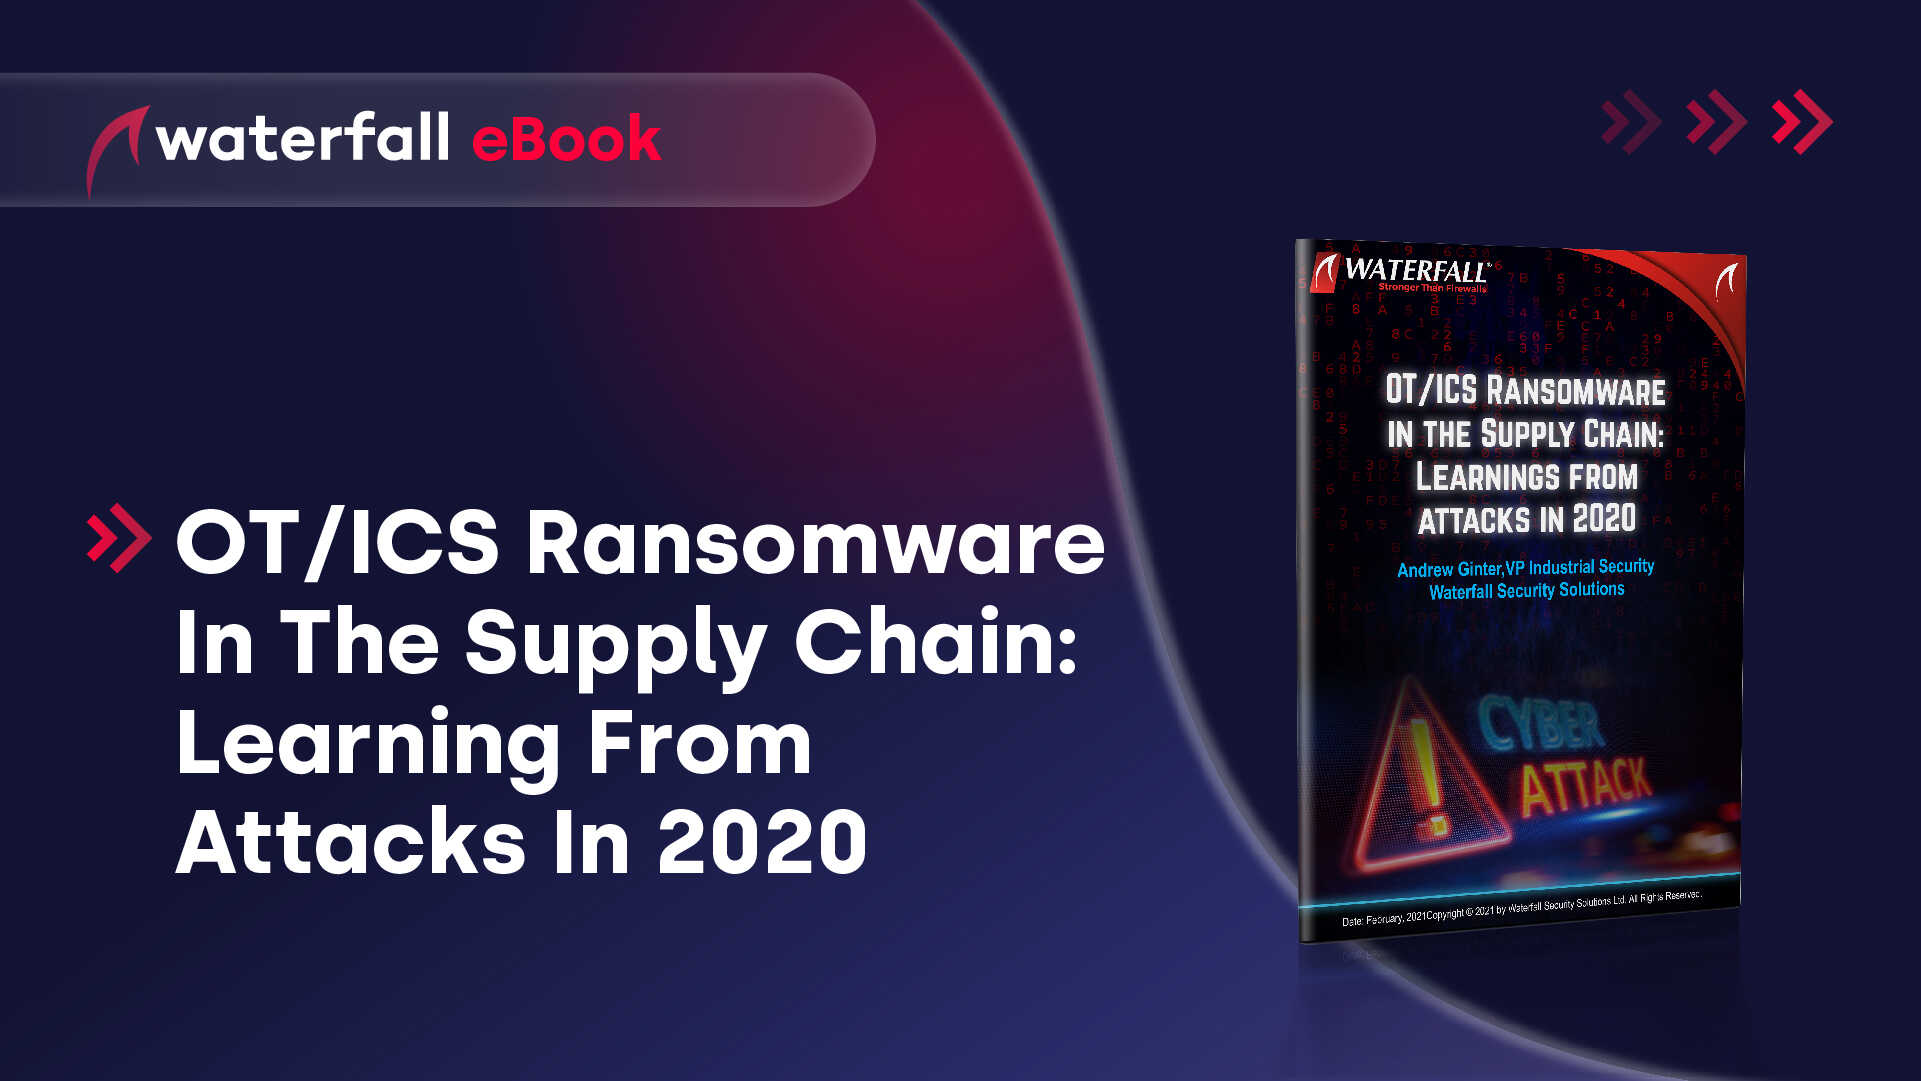 ICS/OT Ransomware in the Supply Chain: Learnings from attacks in 2020 ebook